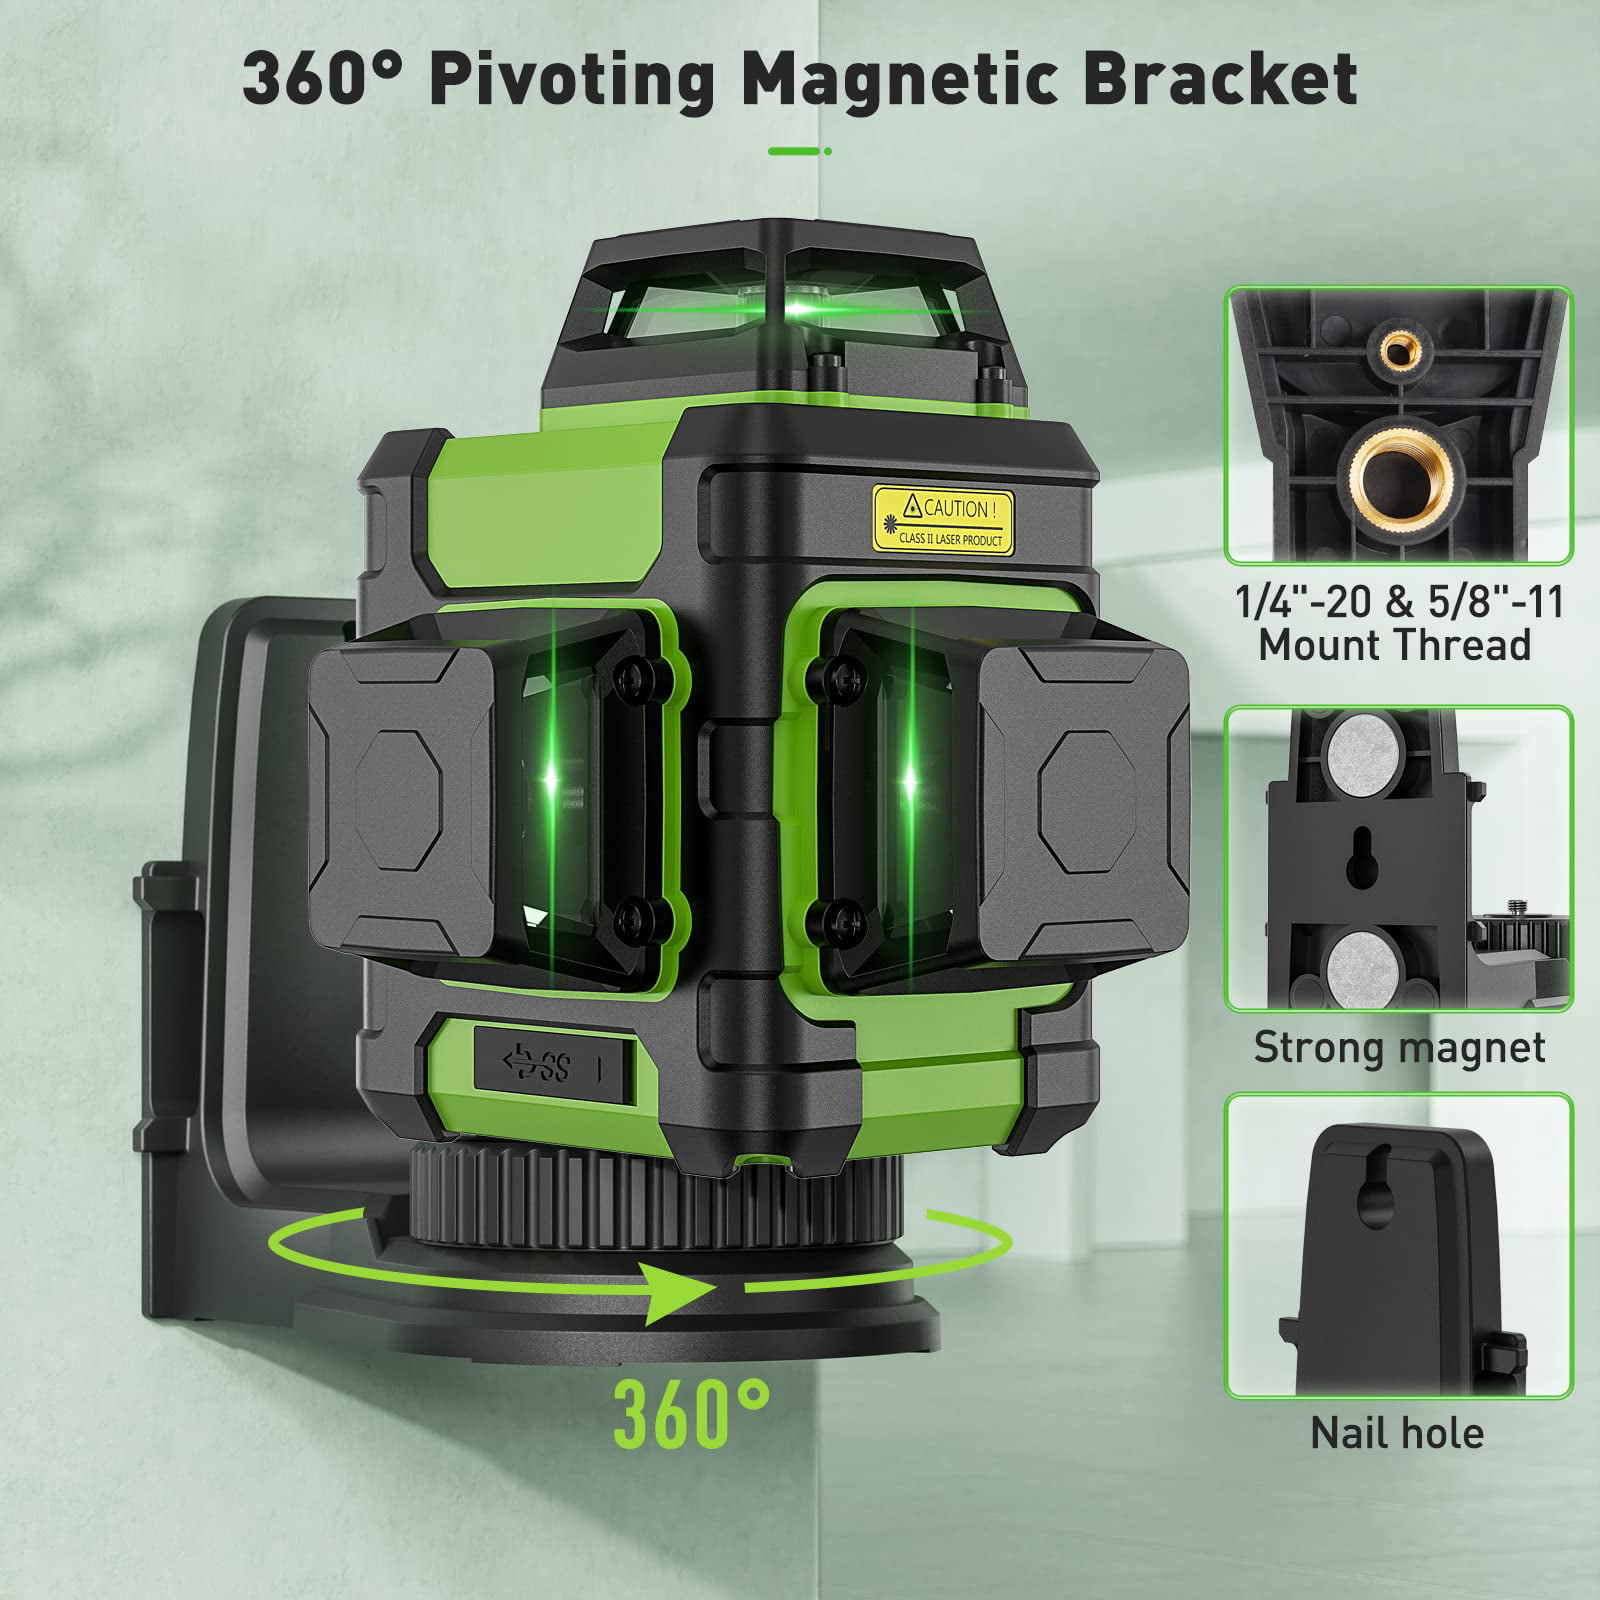 Laser Level, SHAWTY Bright Green Beam Cross Line with Self Leveling, Laser  Level Line Tool with Vertical and Horizontal Line, 360° Magnetic Pivoting,  shawty's 